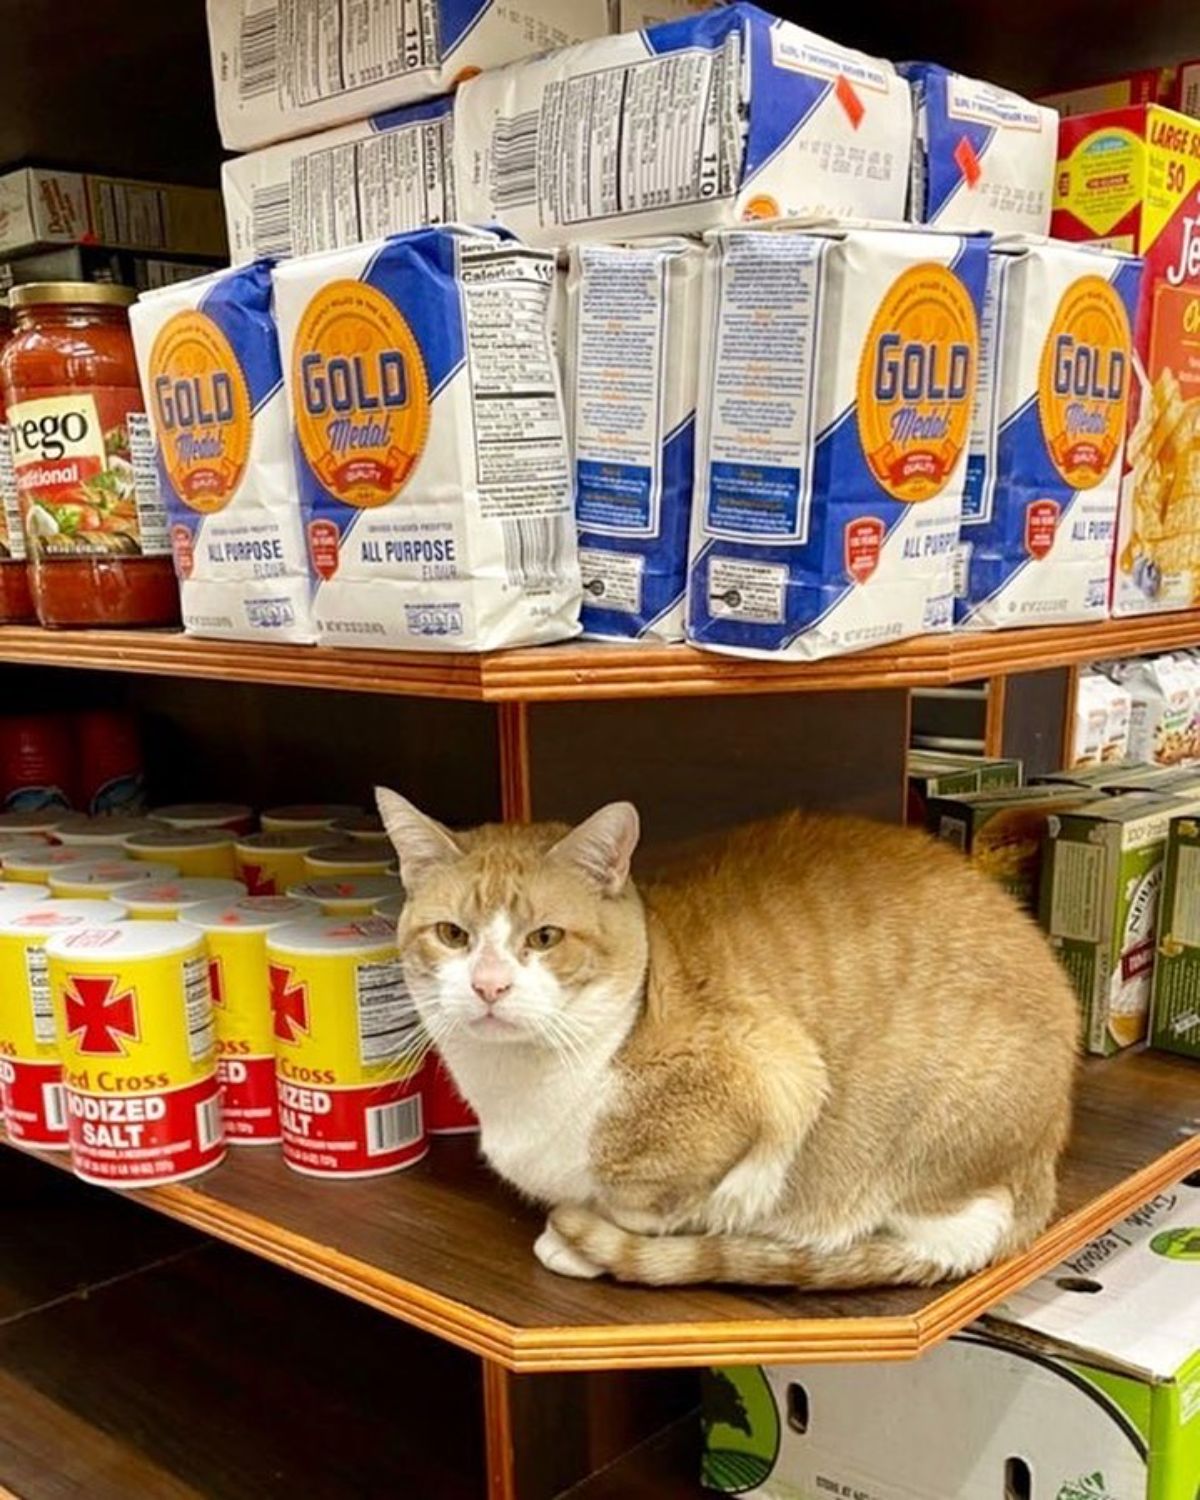 orange and white cat sitting in a shelf next to cans of salt